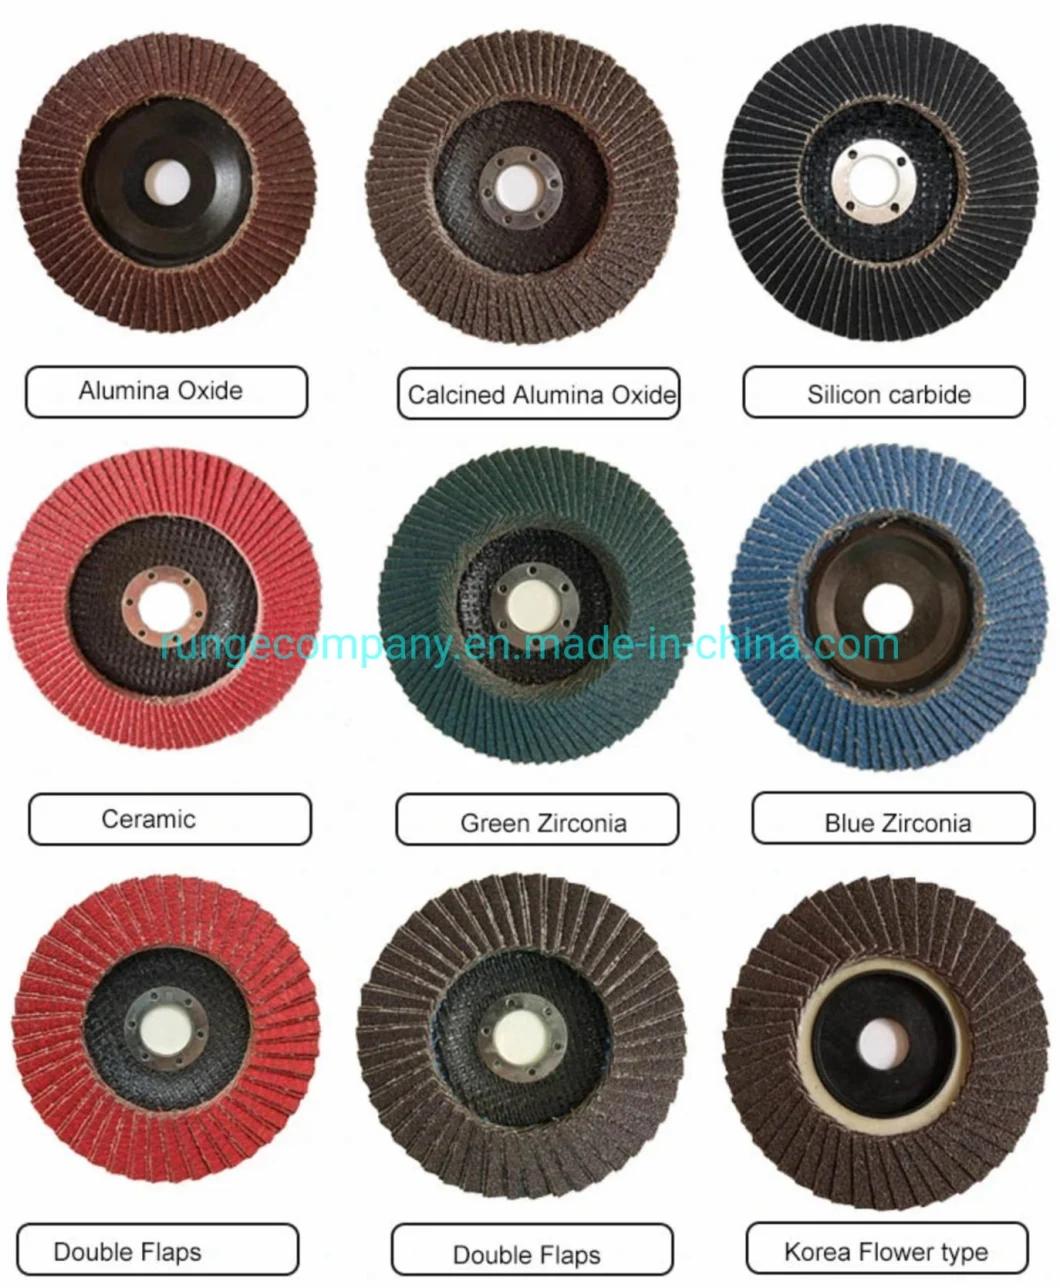 Power Electric Tools Parts T29 Aluminum Oxide Angle Grinder Sanding 4 1/2 Flap Disc for Grinding Rust Removal, Blending, Cleaning